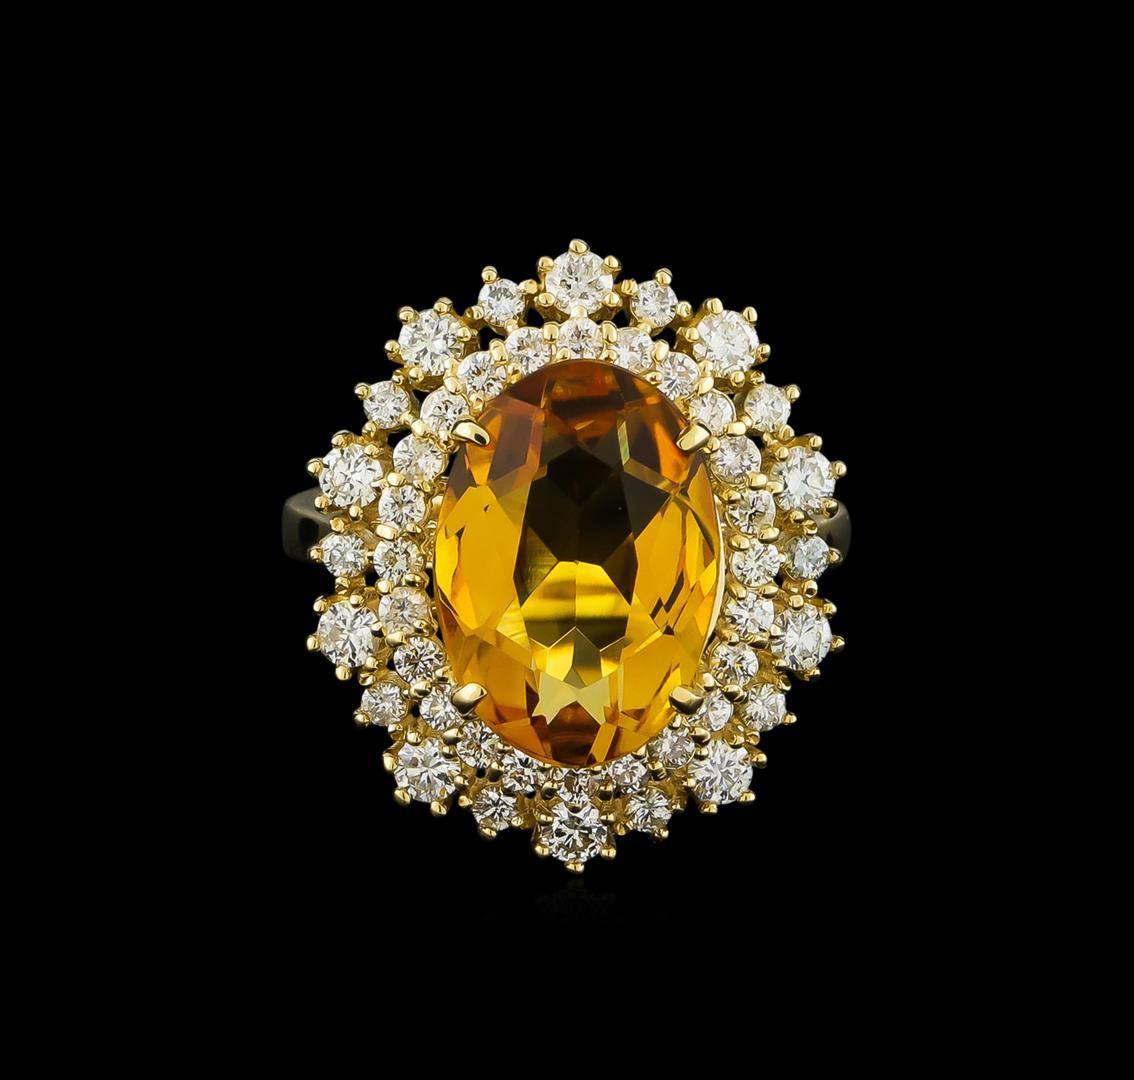 4.23 ctw Citrine and Diamond Ring - 14KT Yellow Gold